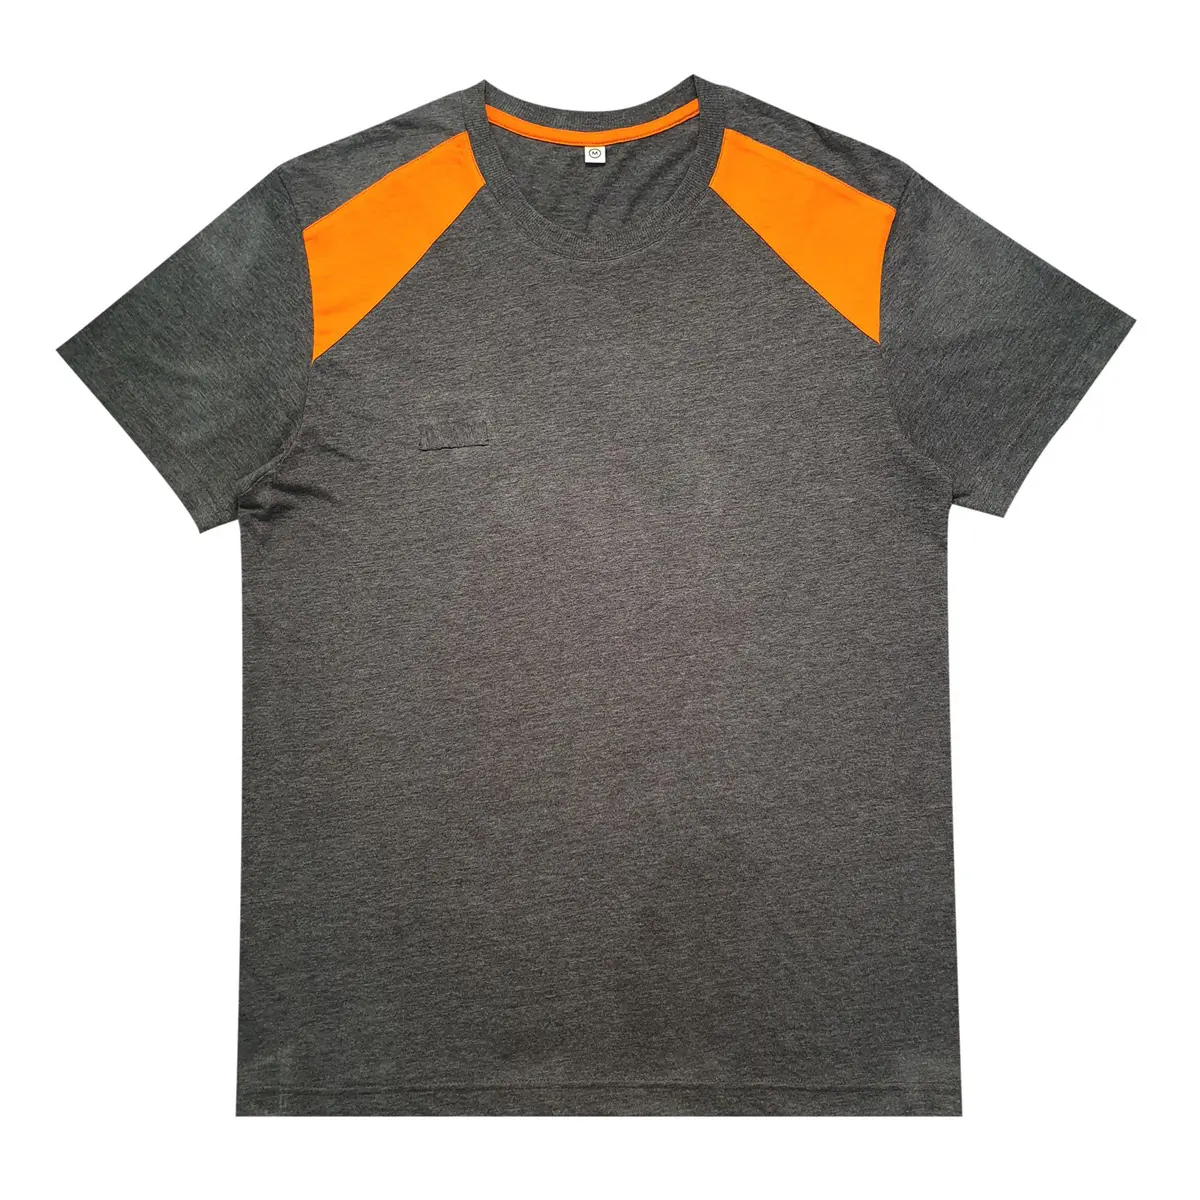 Fashionable T-shirt for men Clothes for adults reliable supplier 100% cotton Black and orange short sleeves